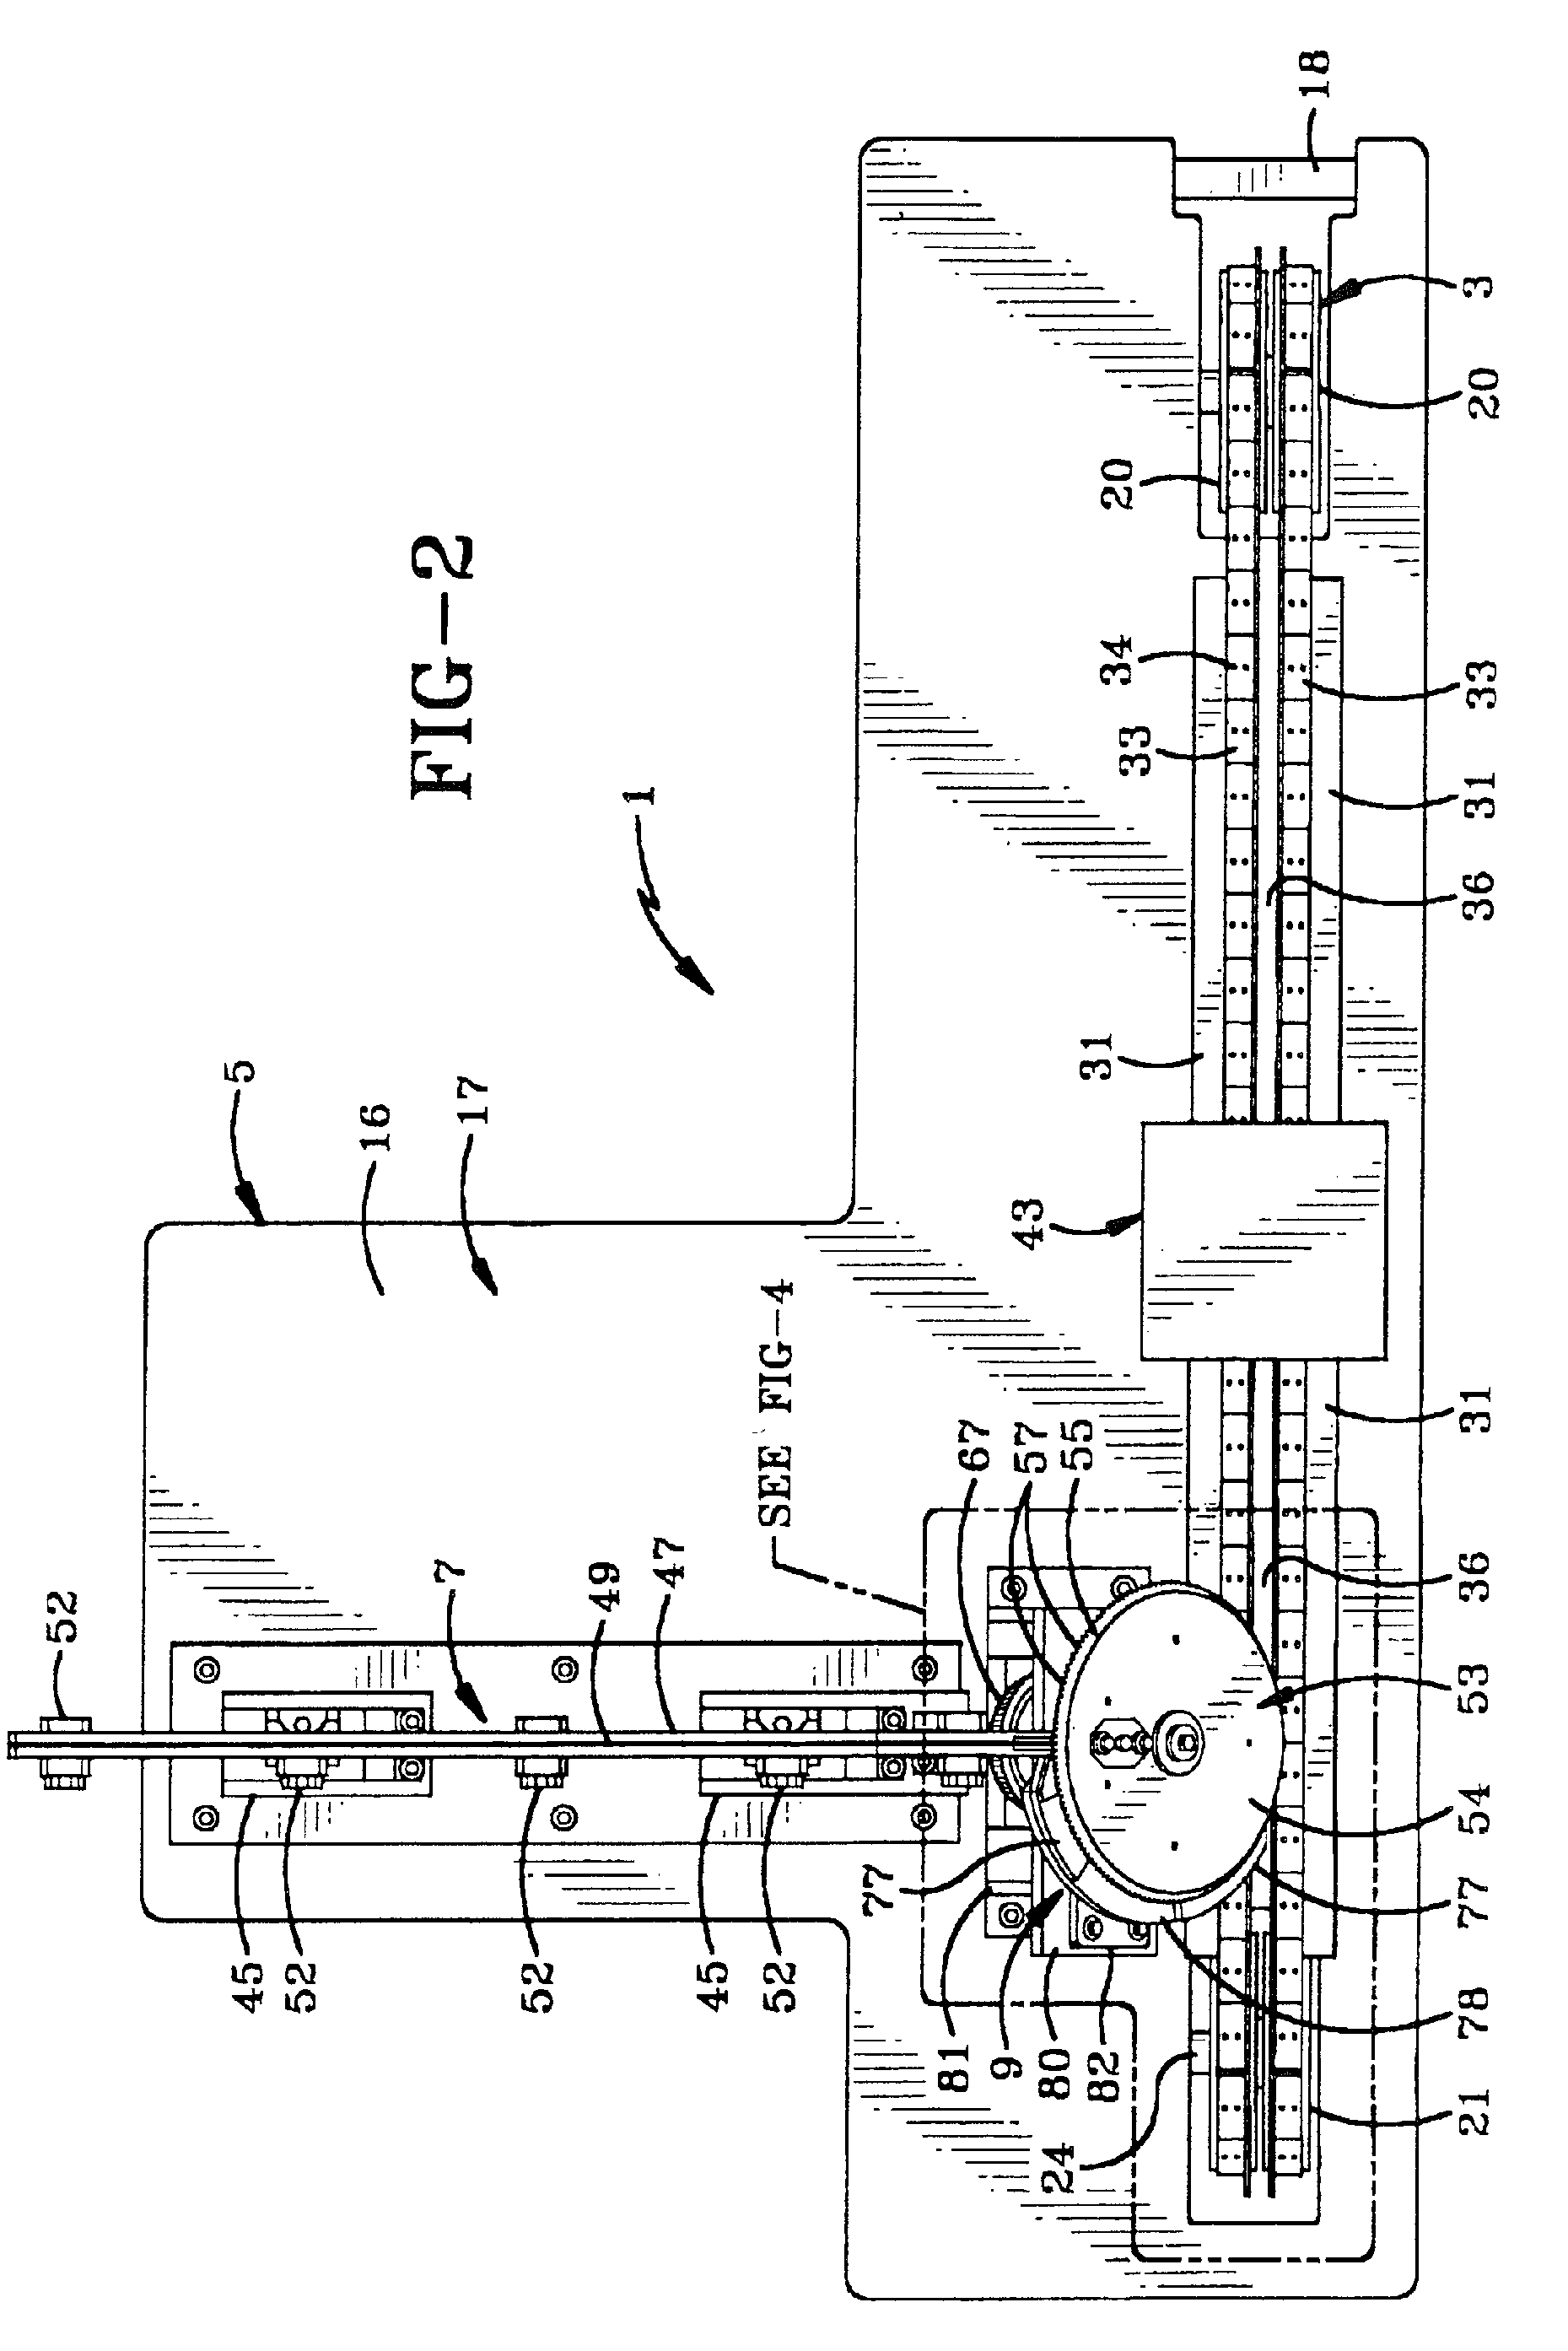 Method and apparatus for collating nails